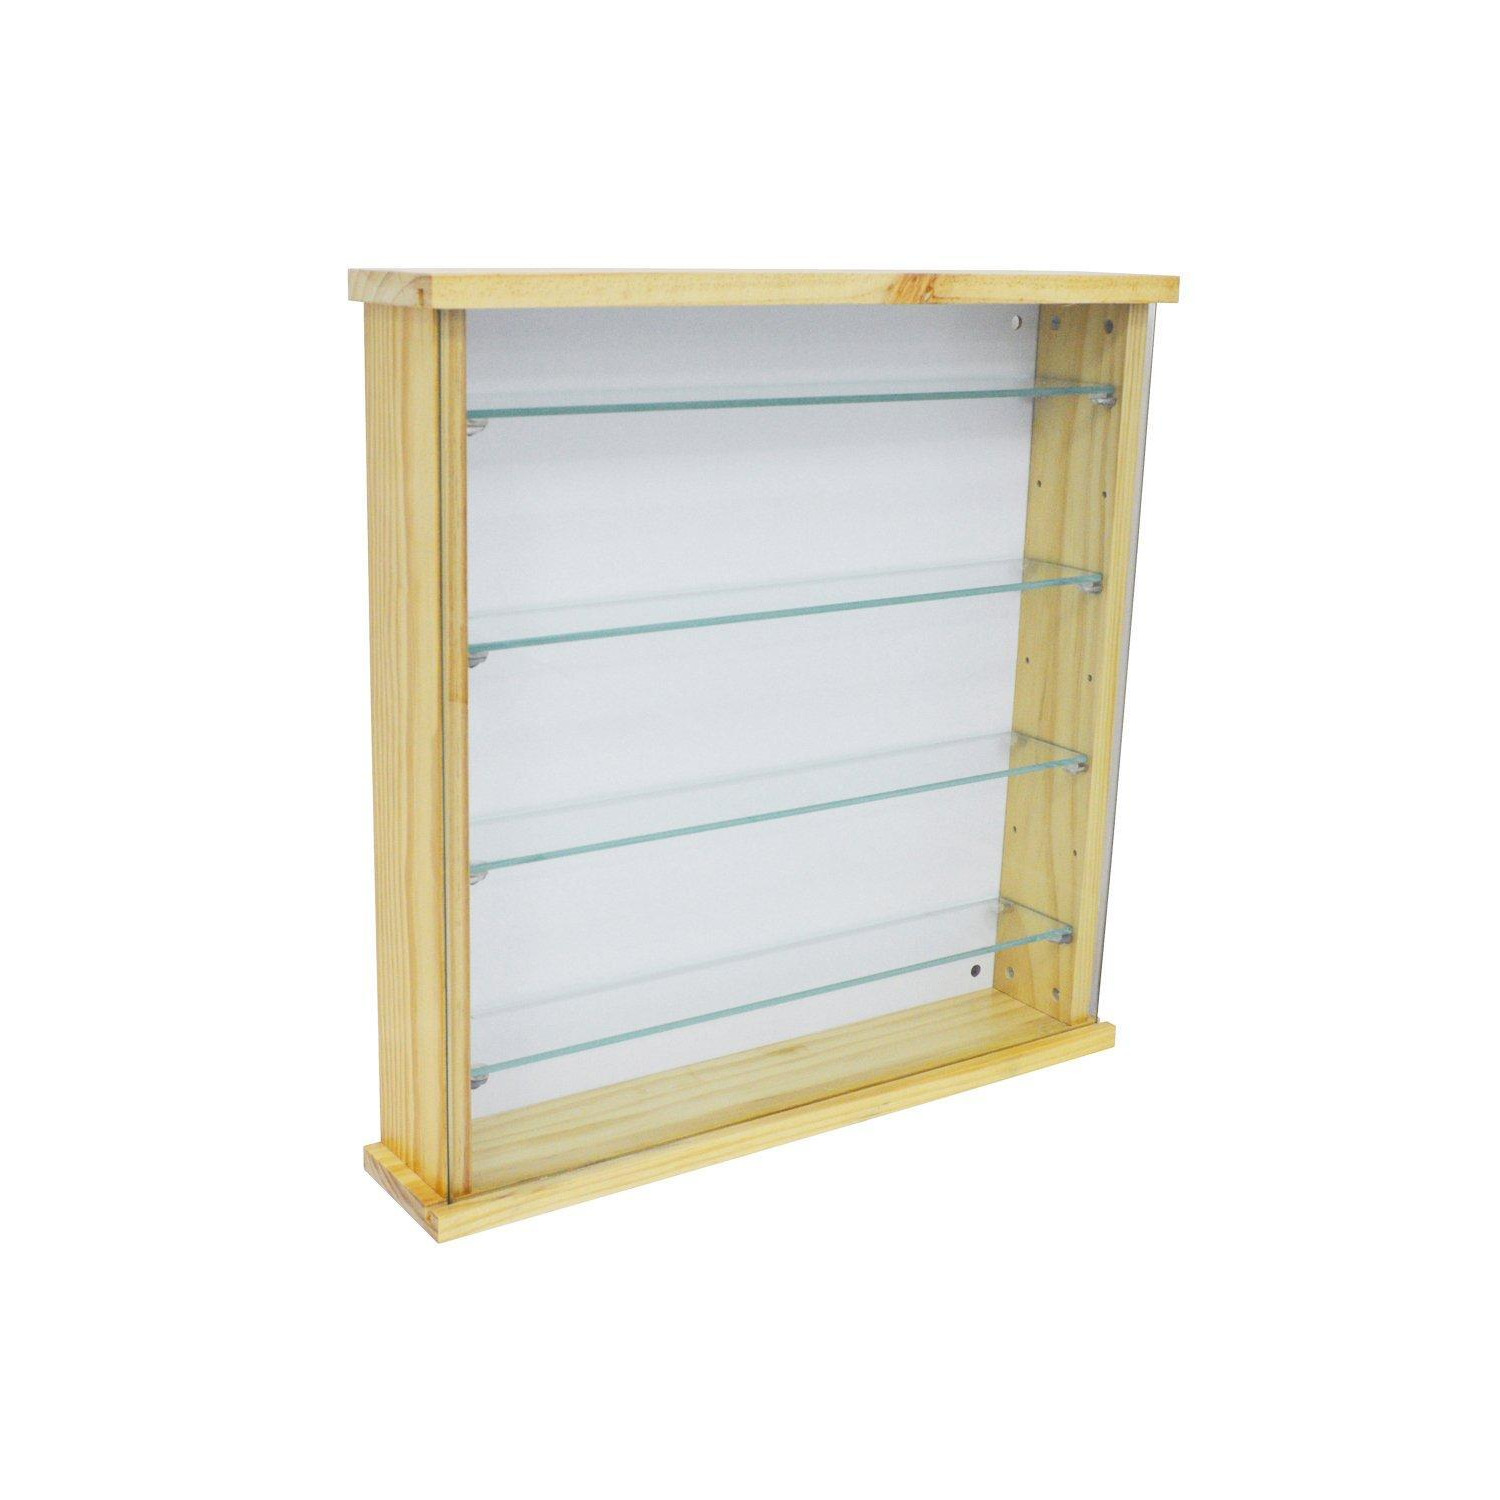 'Exhibit'  Solid Wood 4 Shelf Glass Wall Display Cabinet  Natural Pine - image 1